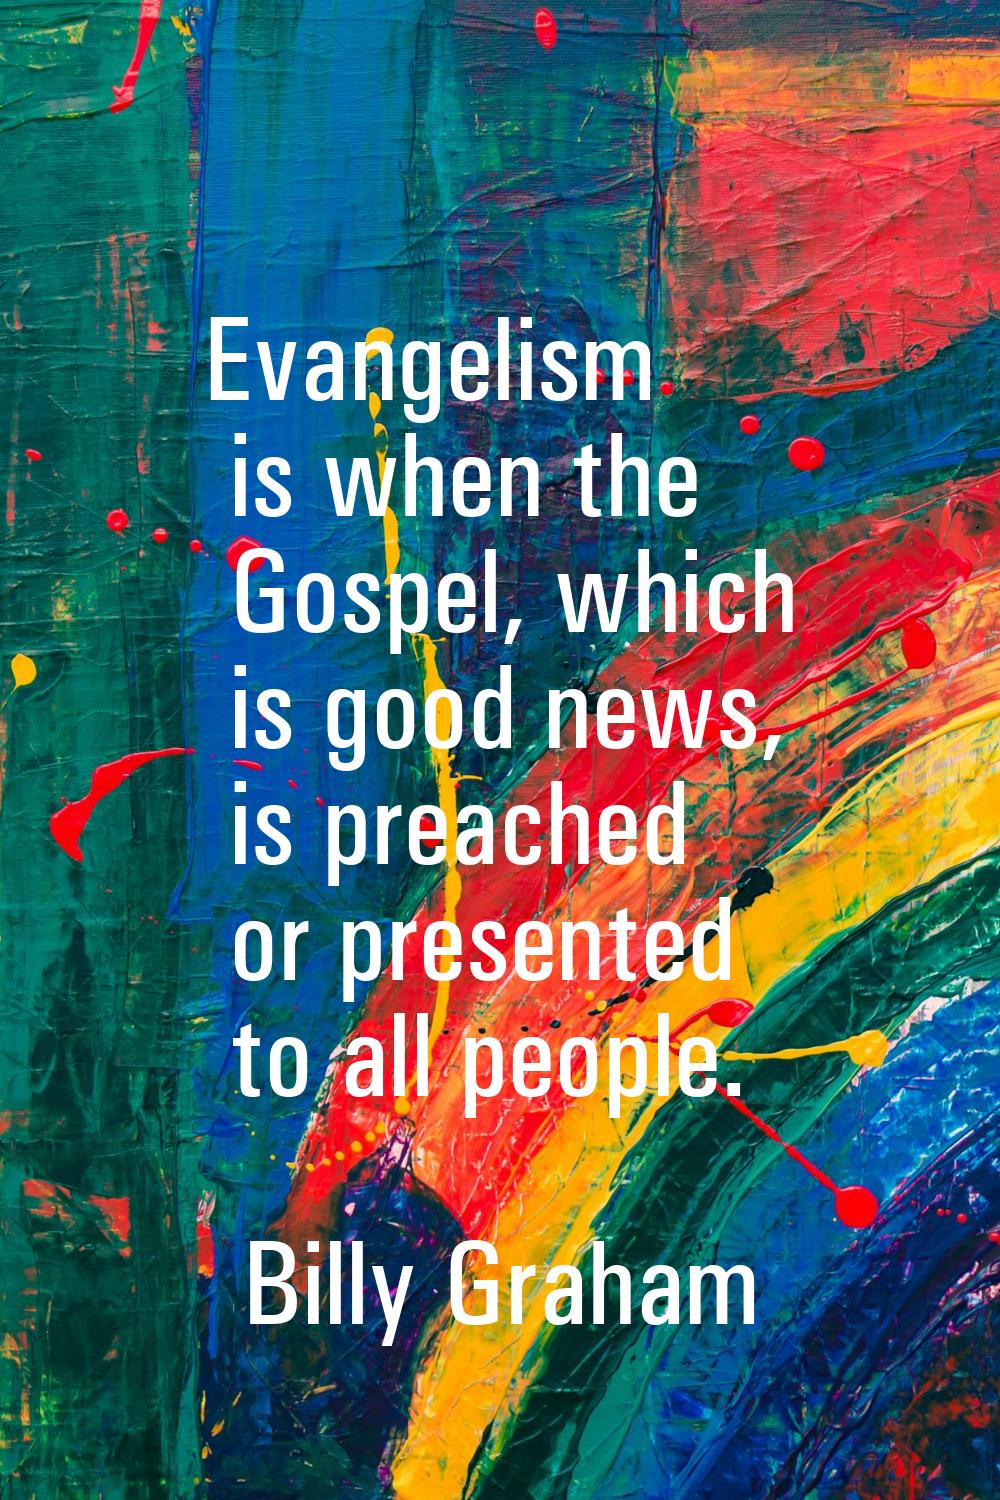 Evangelism is when the Gospel, which is good news, is preached or presented to all people.